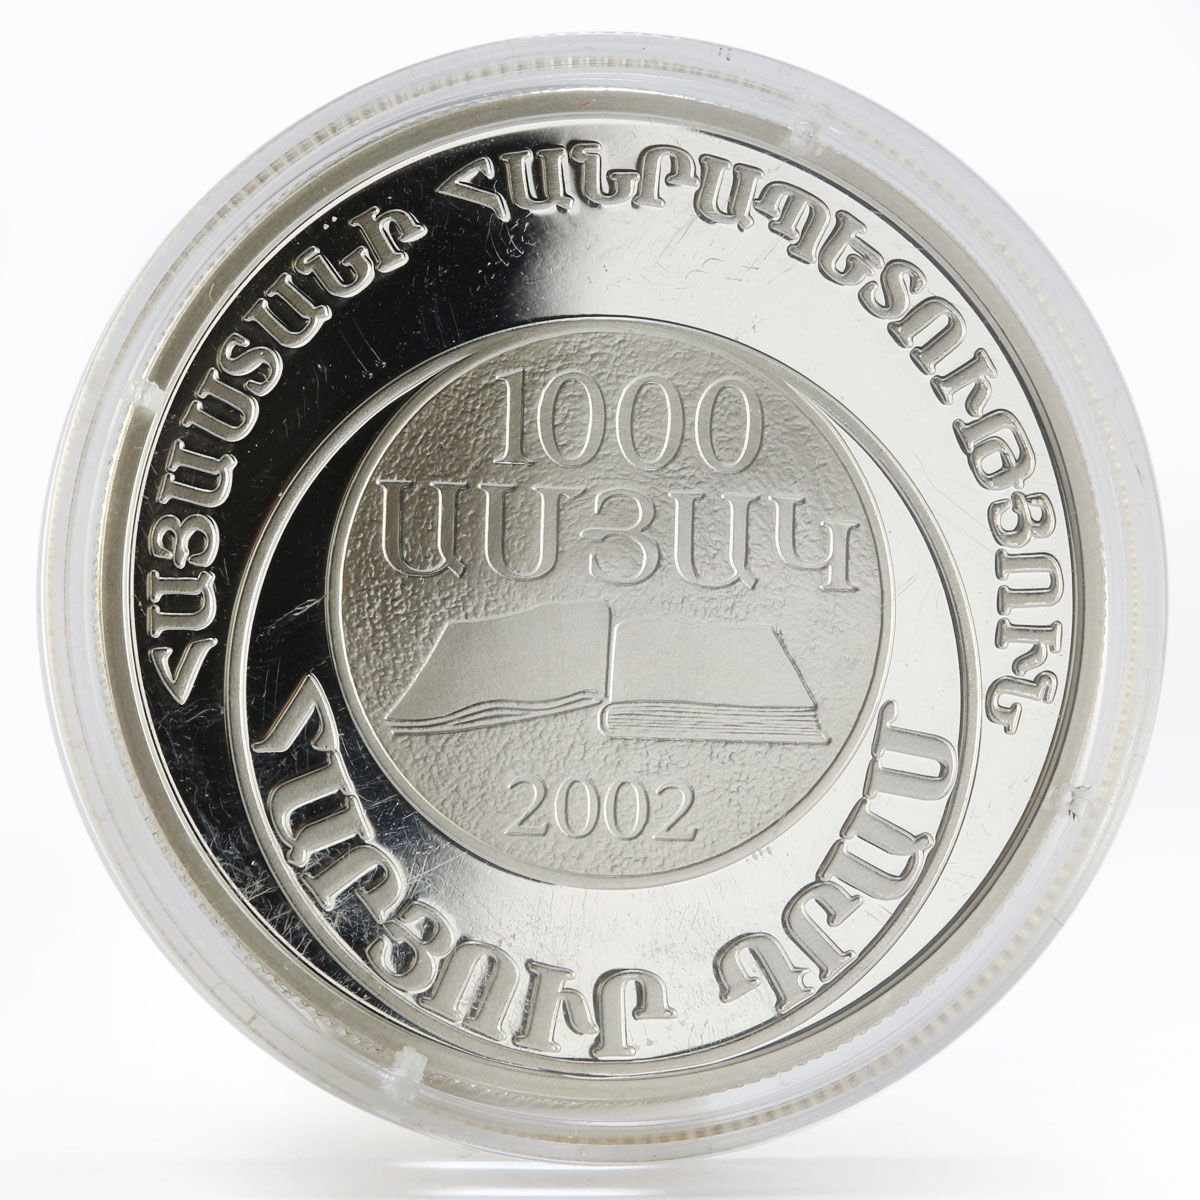 Armenia 100 drams Book of Sadness 1000th Anniverasry proof silver coin 2002